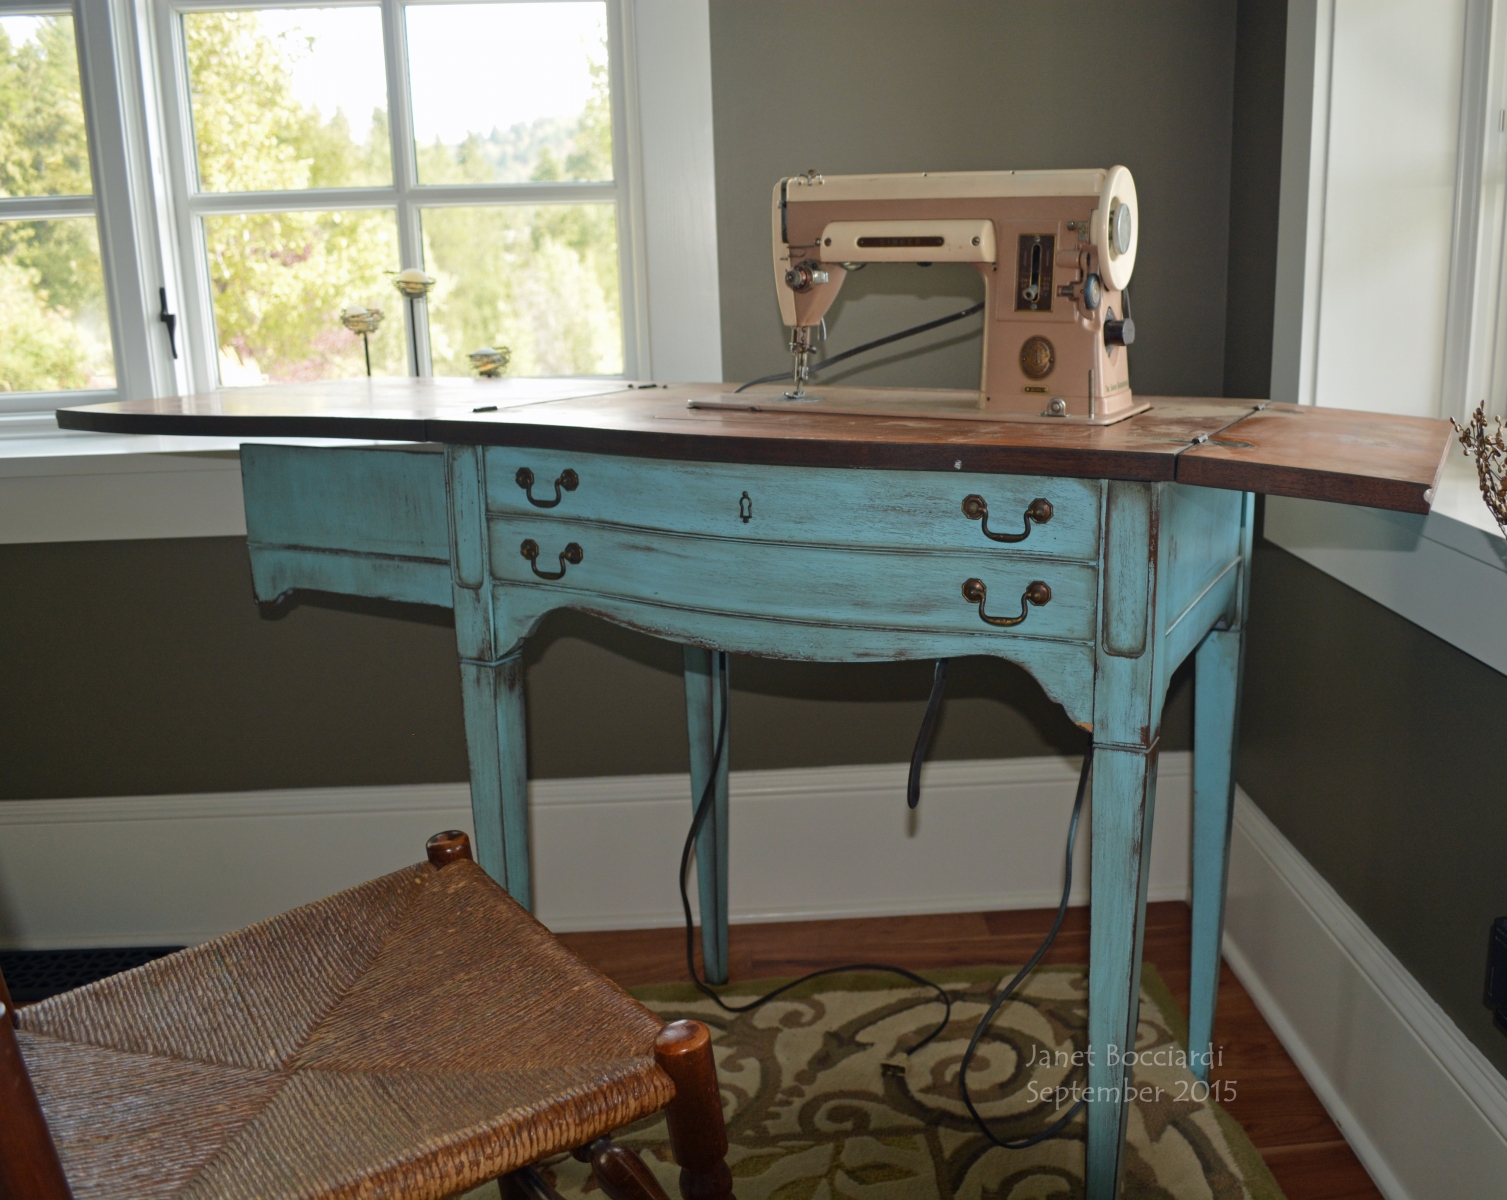 Singer Sewing Machine model 301A in cabinet